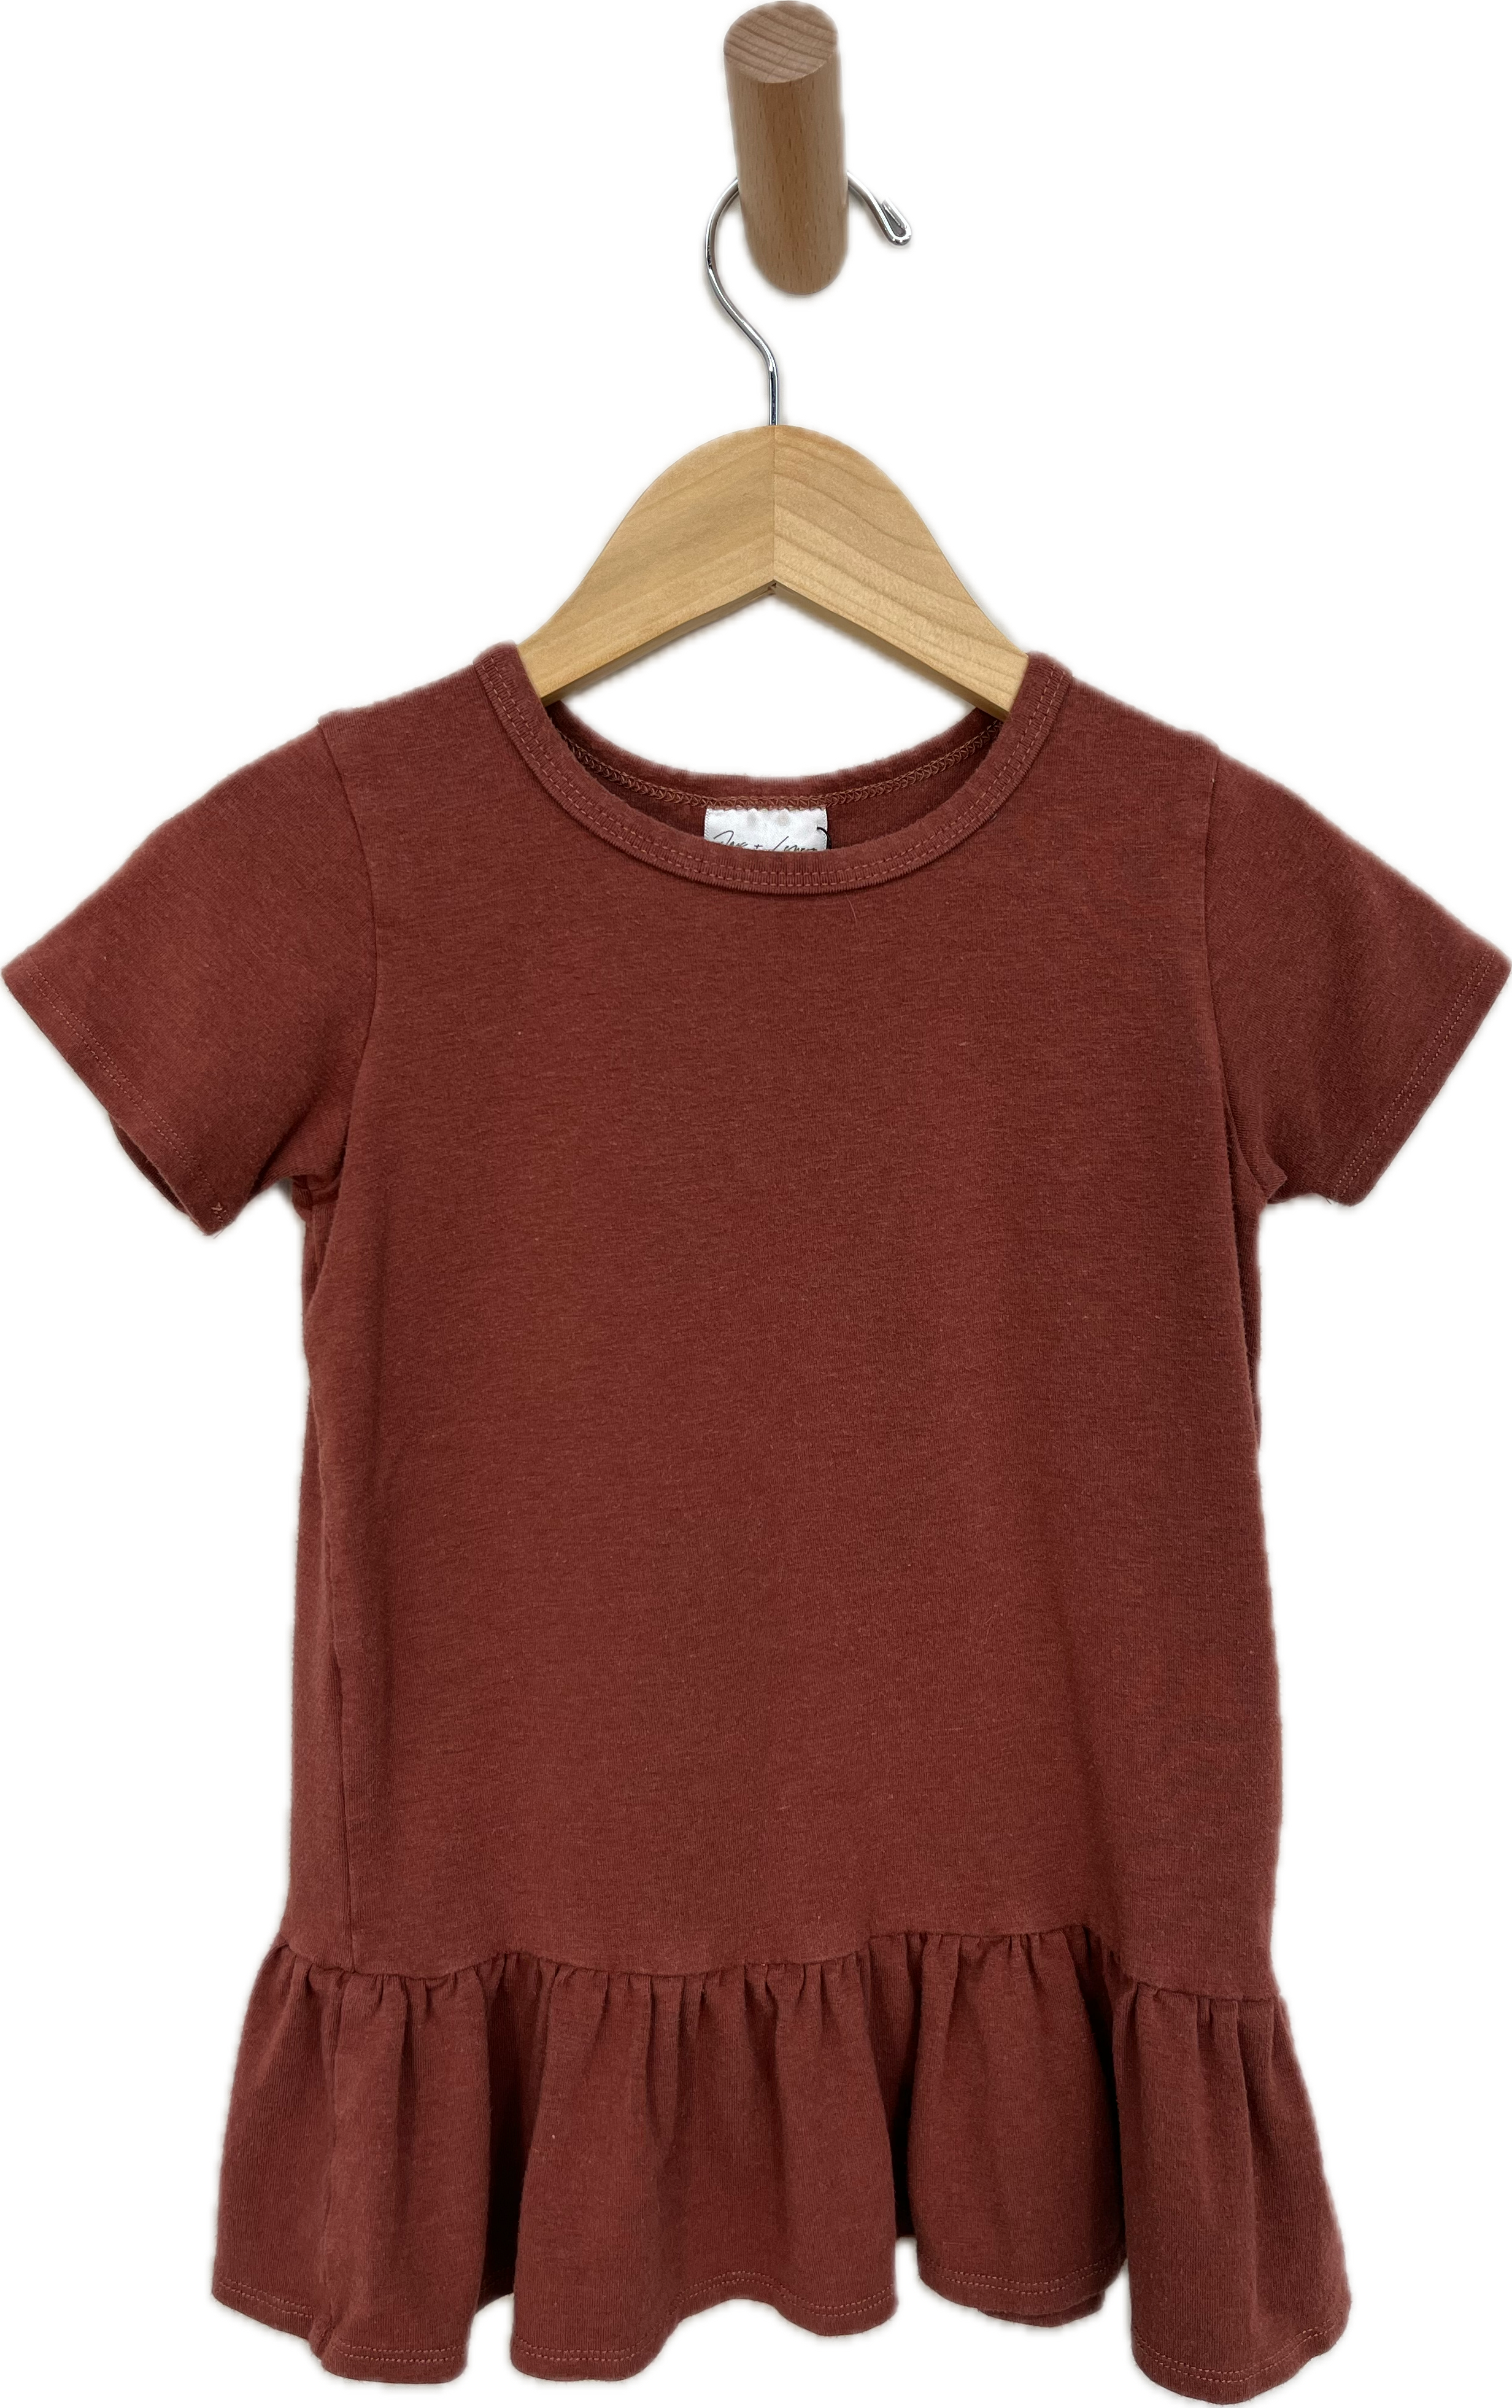 jax + lennon red brown ruffle top 2T (pilled)